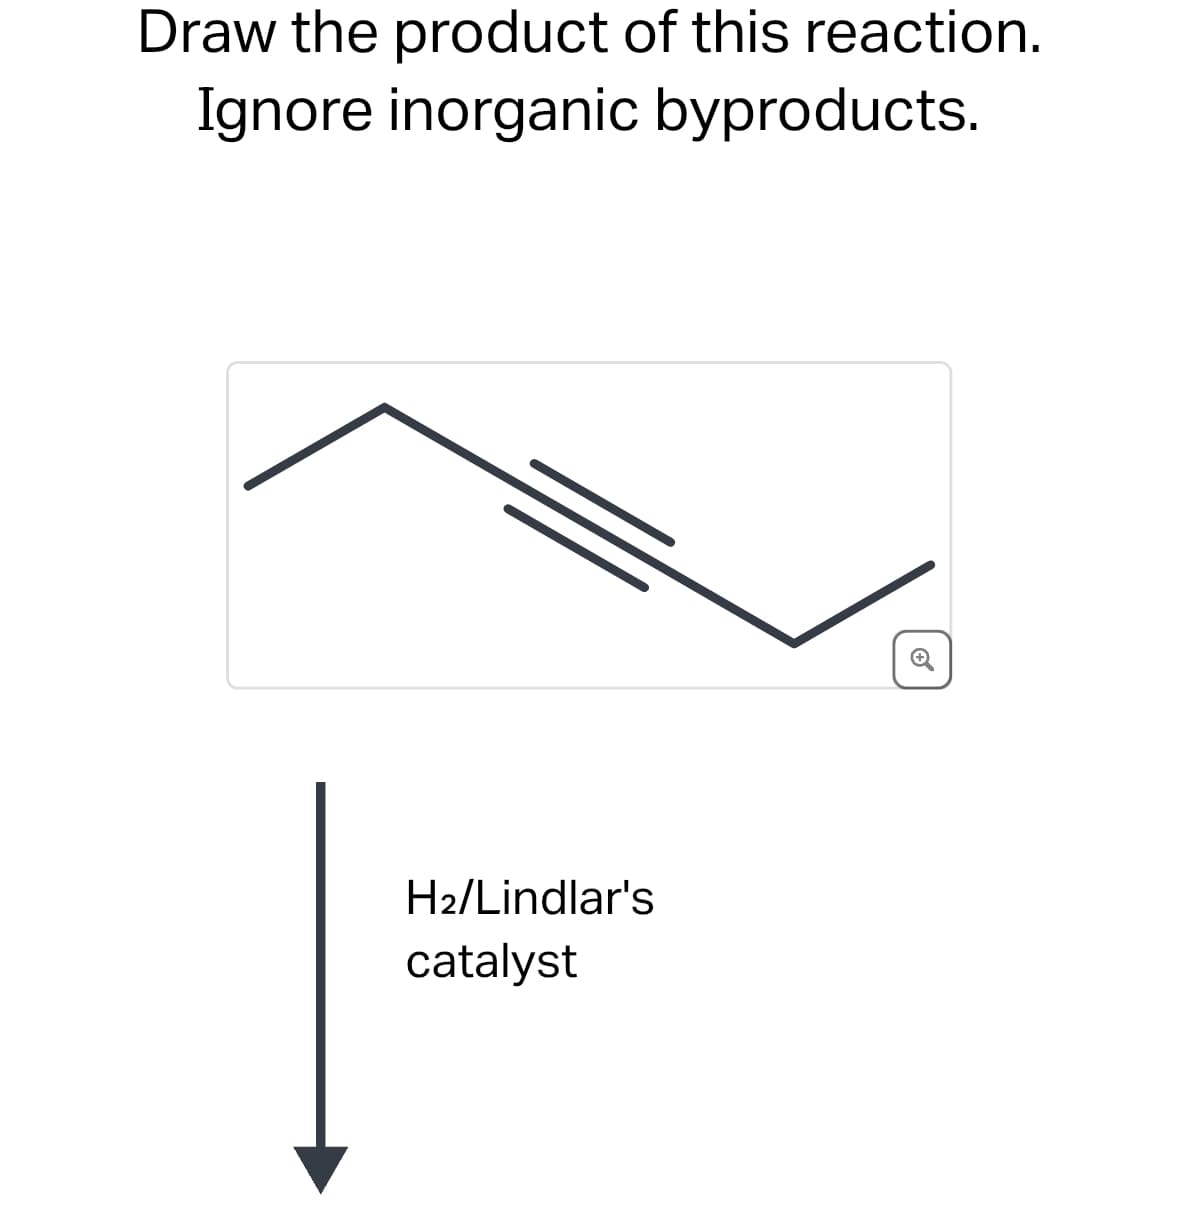 Draw the product of this reaction.
Ignore inorganic byproducts.
H2/Lindlar's
catalyst